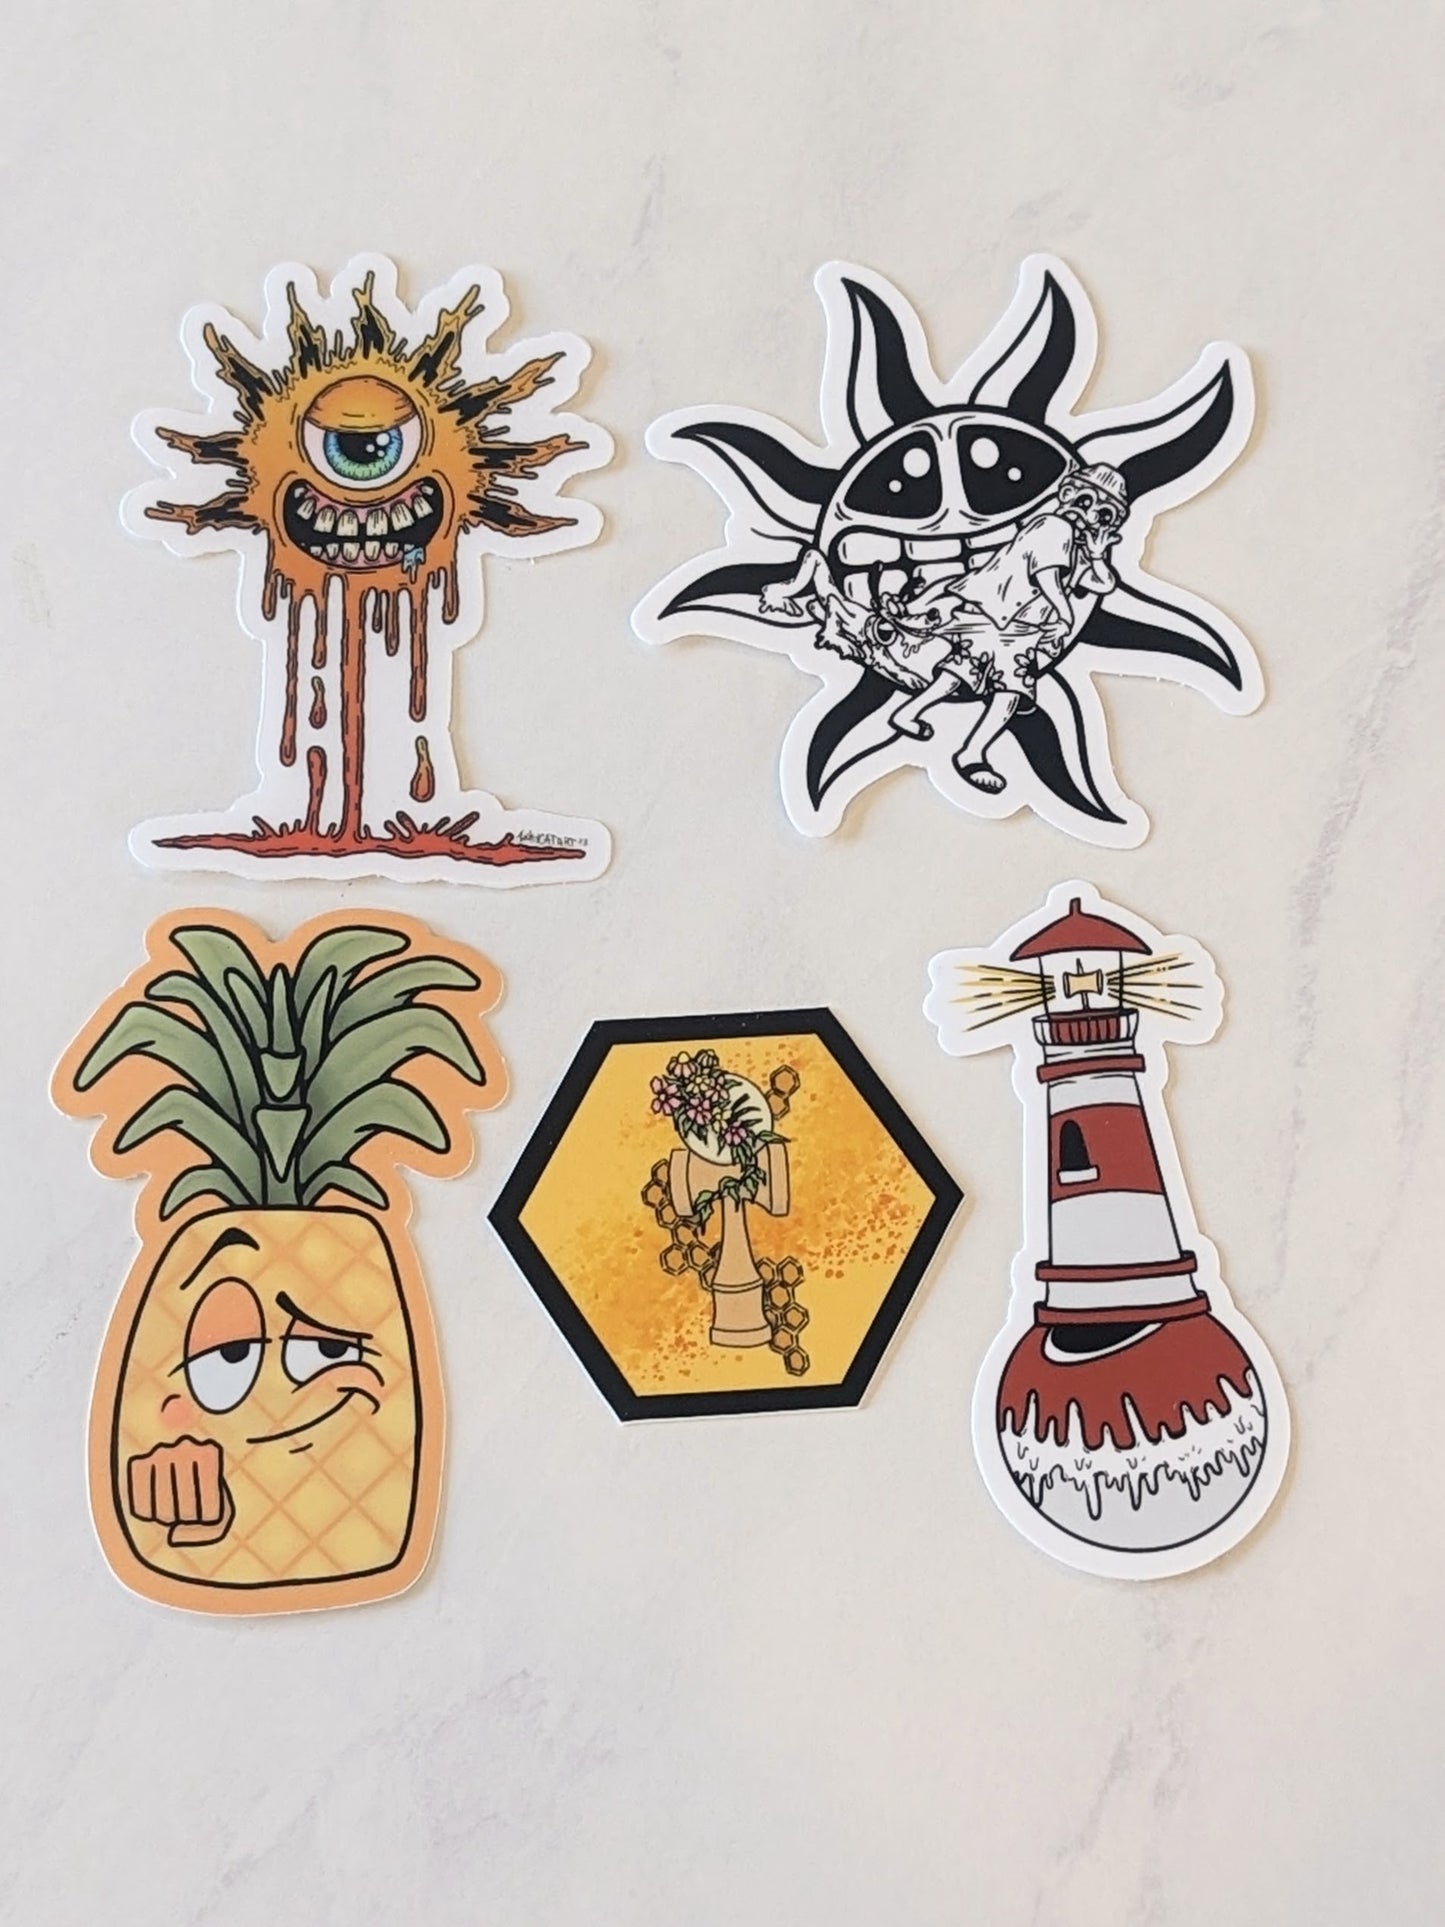 A collection of summer themed stickers by artists Kellie.love, Inkycat art, and Ghosttown ATL. The stickers include a cycloptic smiling orange drippy sun, A Black and white cartoon Sun grimmacing behind a dog pulling the surf shorts of a person gasping, a pineapple waiting to fist bump, a hexagon floral kendama illustration, and a lighthouse on a drippy tama (in a kendama lighthouse trick). 